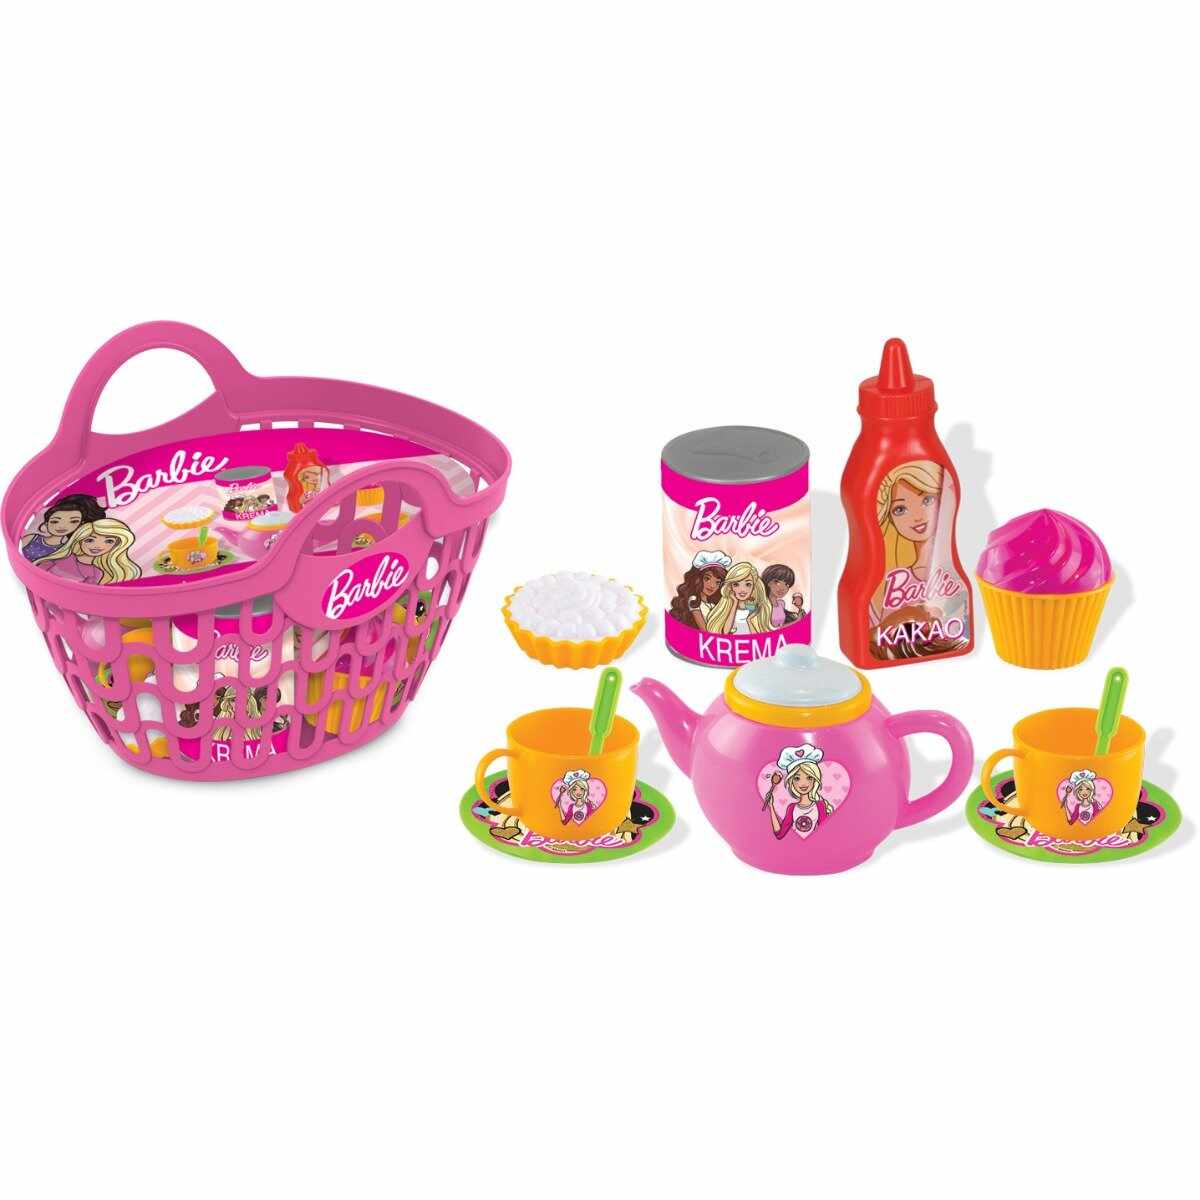 Connection Piping Onlooker Cos picnic Barbie cu accesorii - 1369 produse